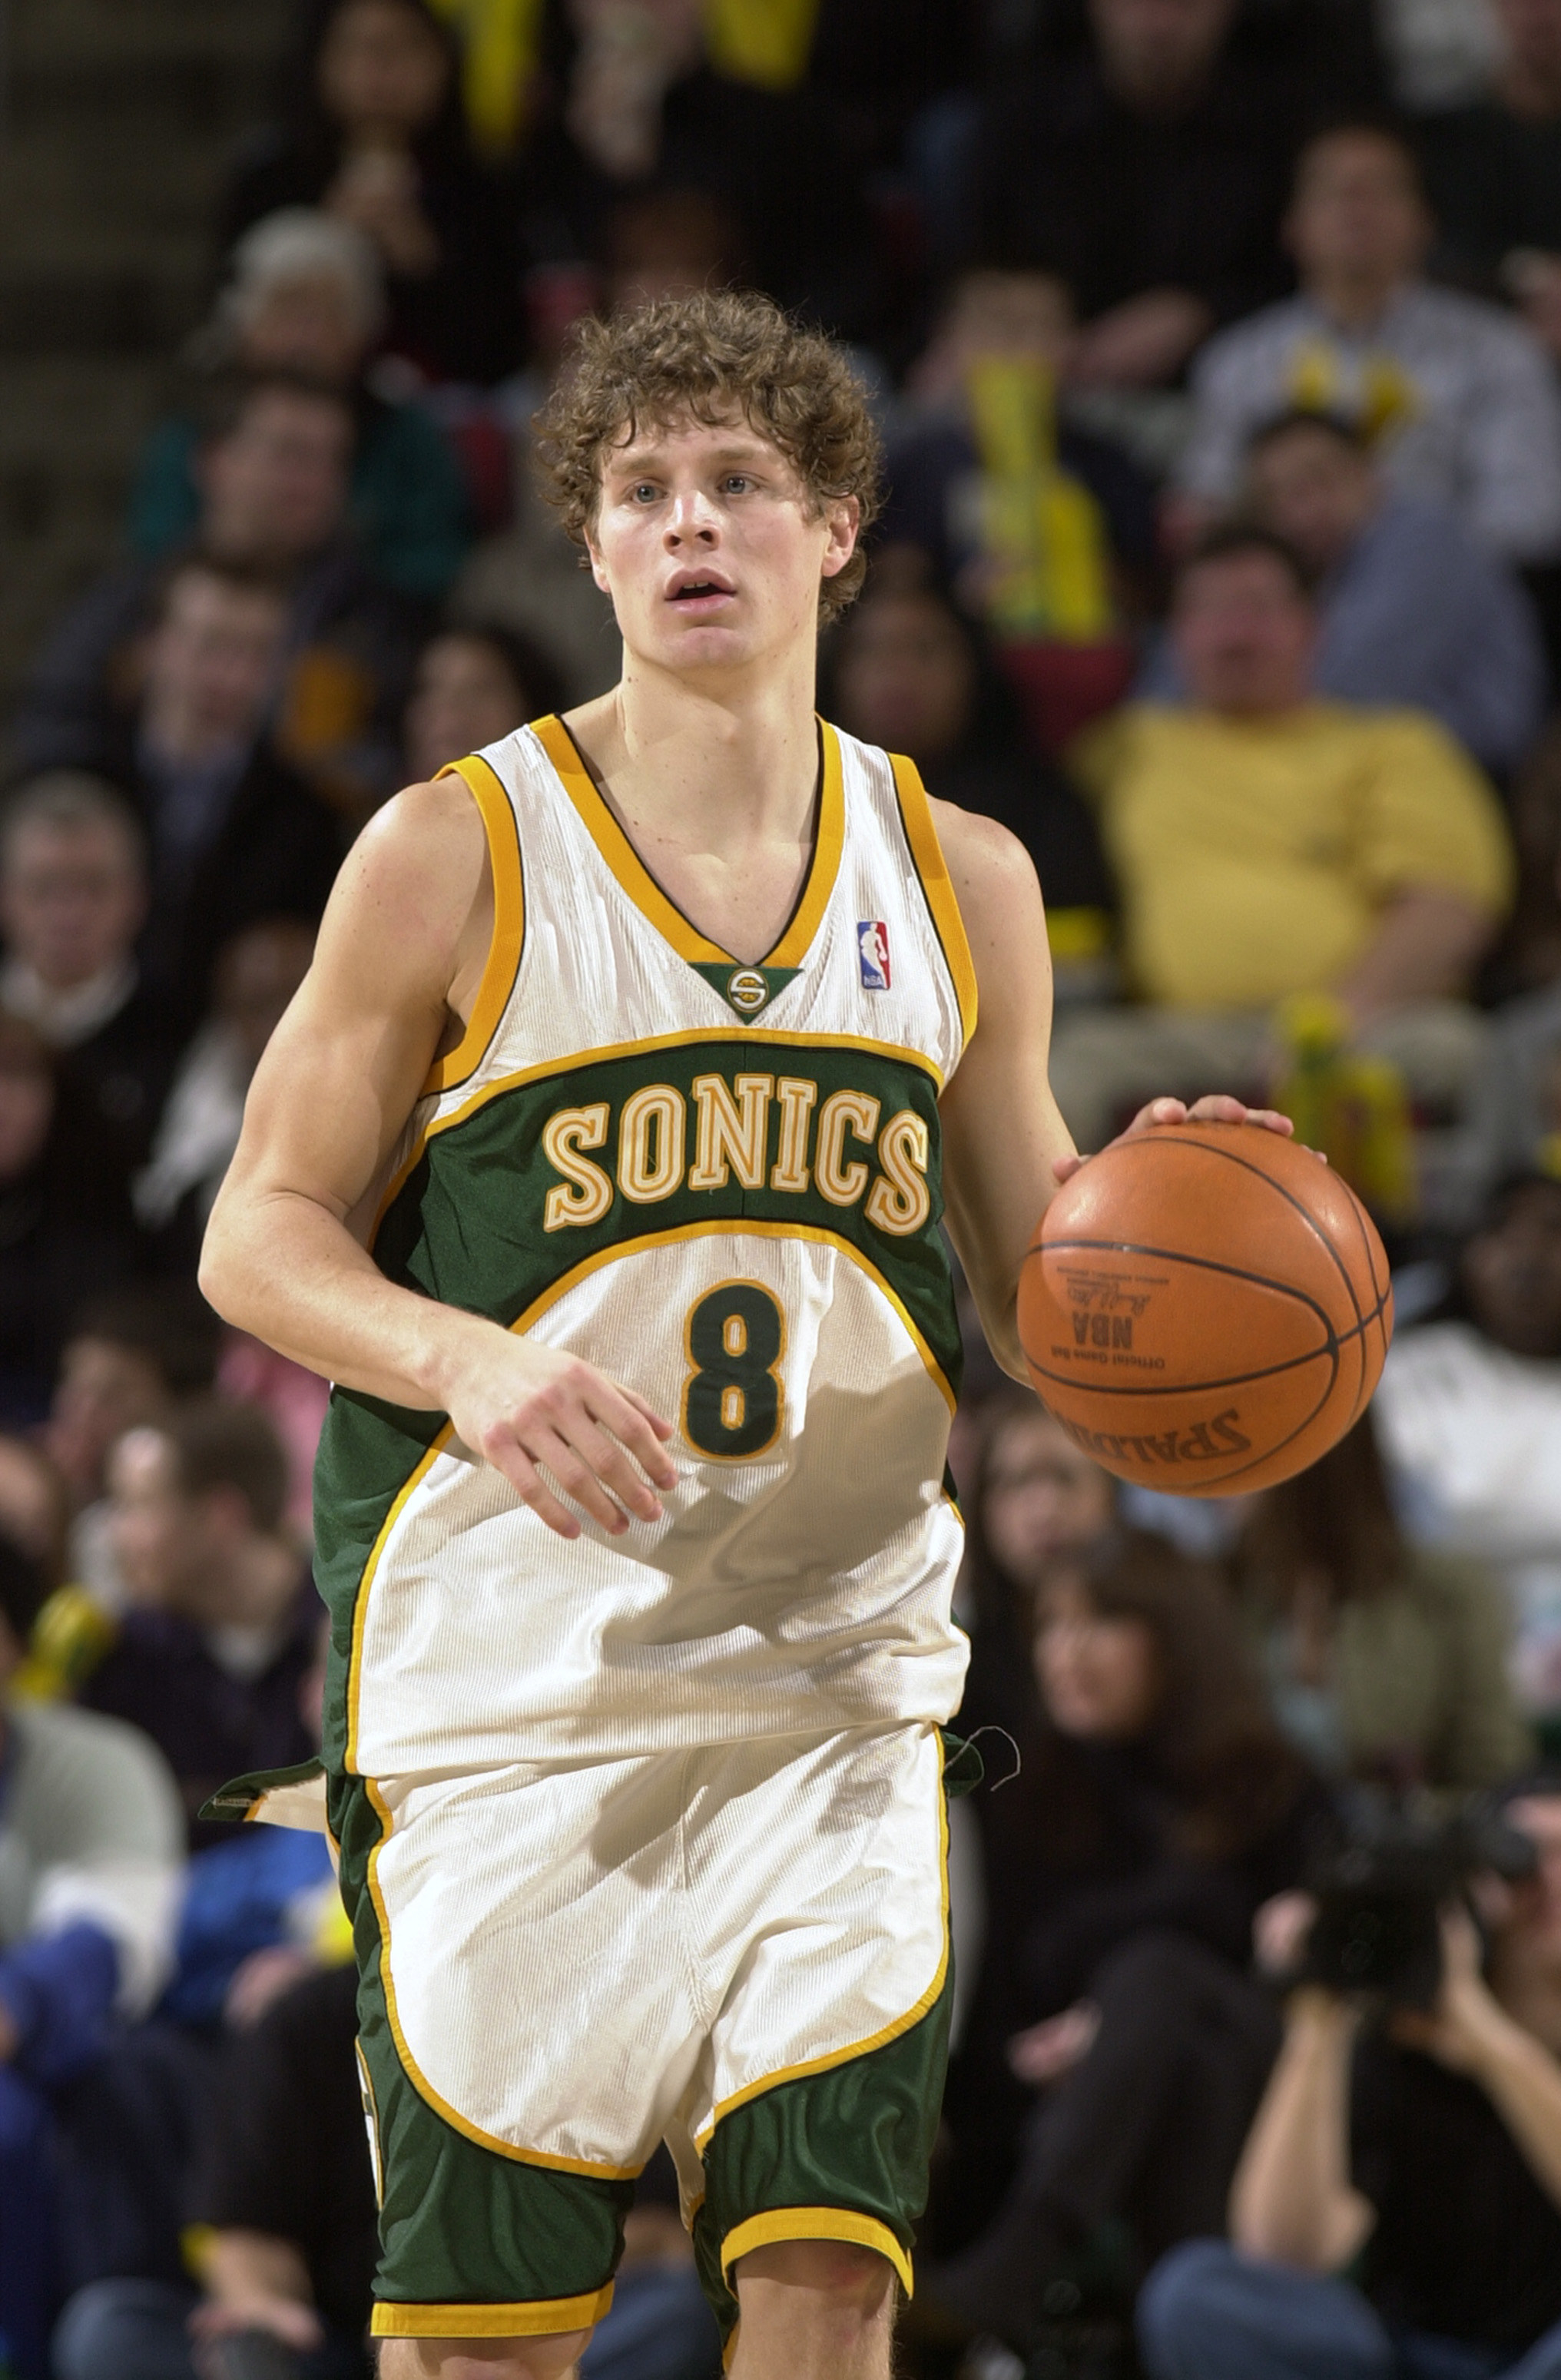 White Sonics jersey with green banner and yellow outlining